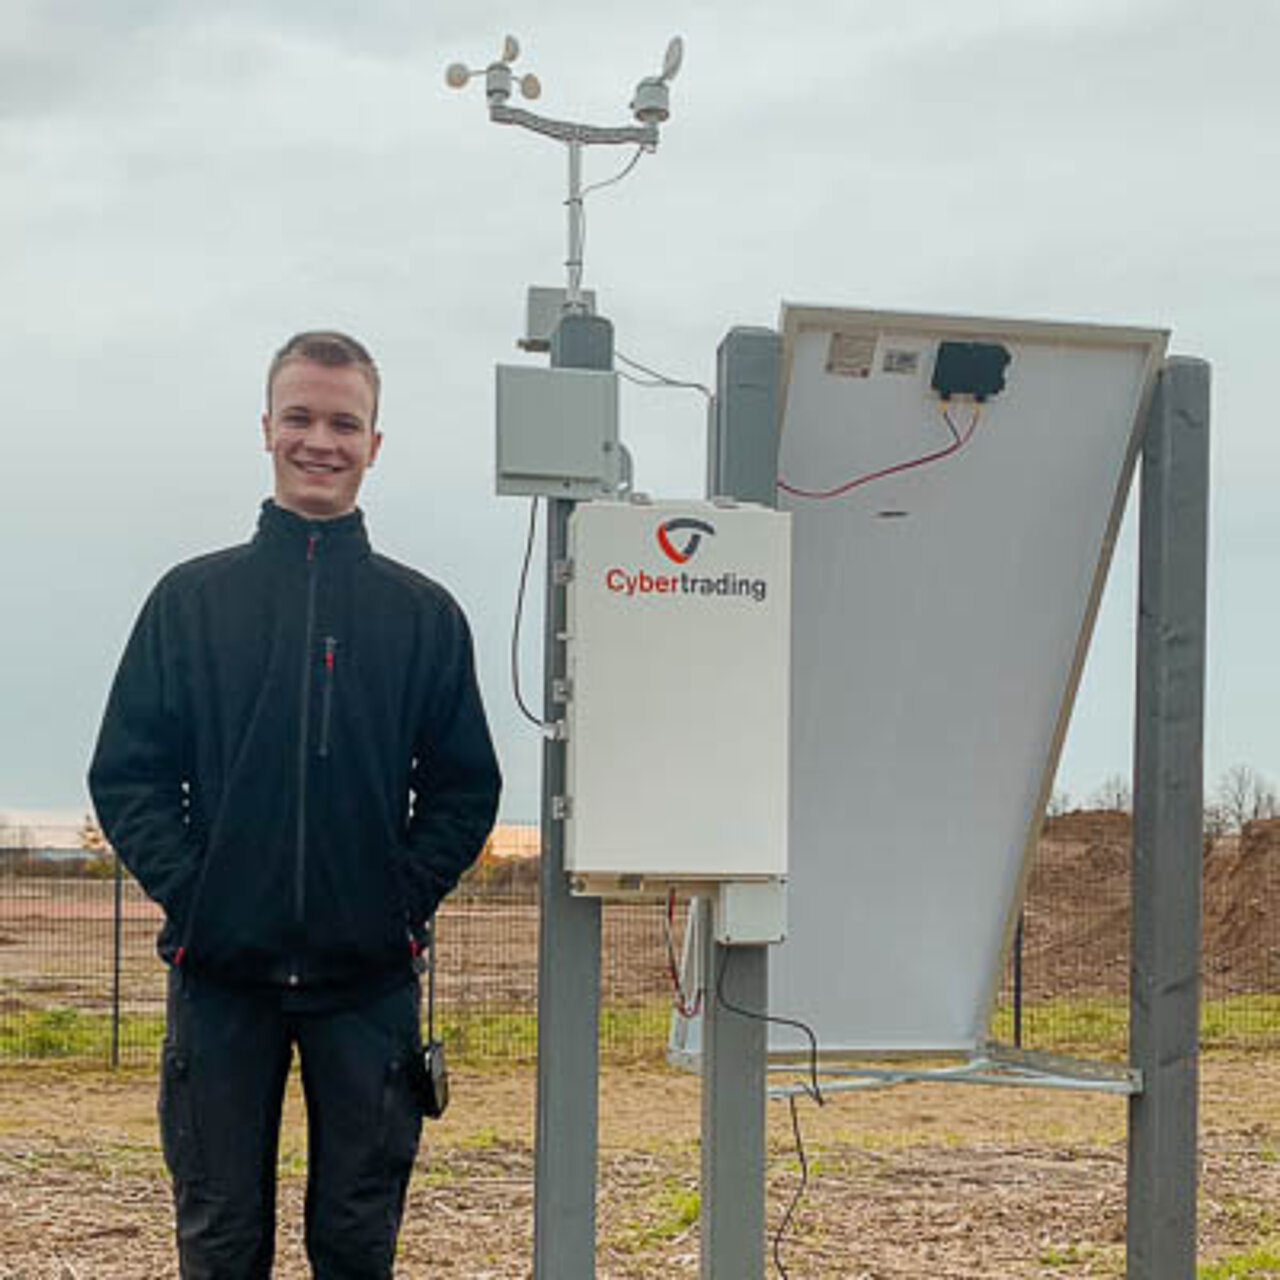 Trainee standing next to weather station